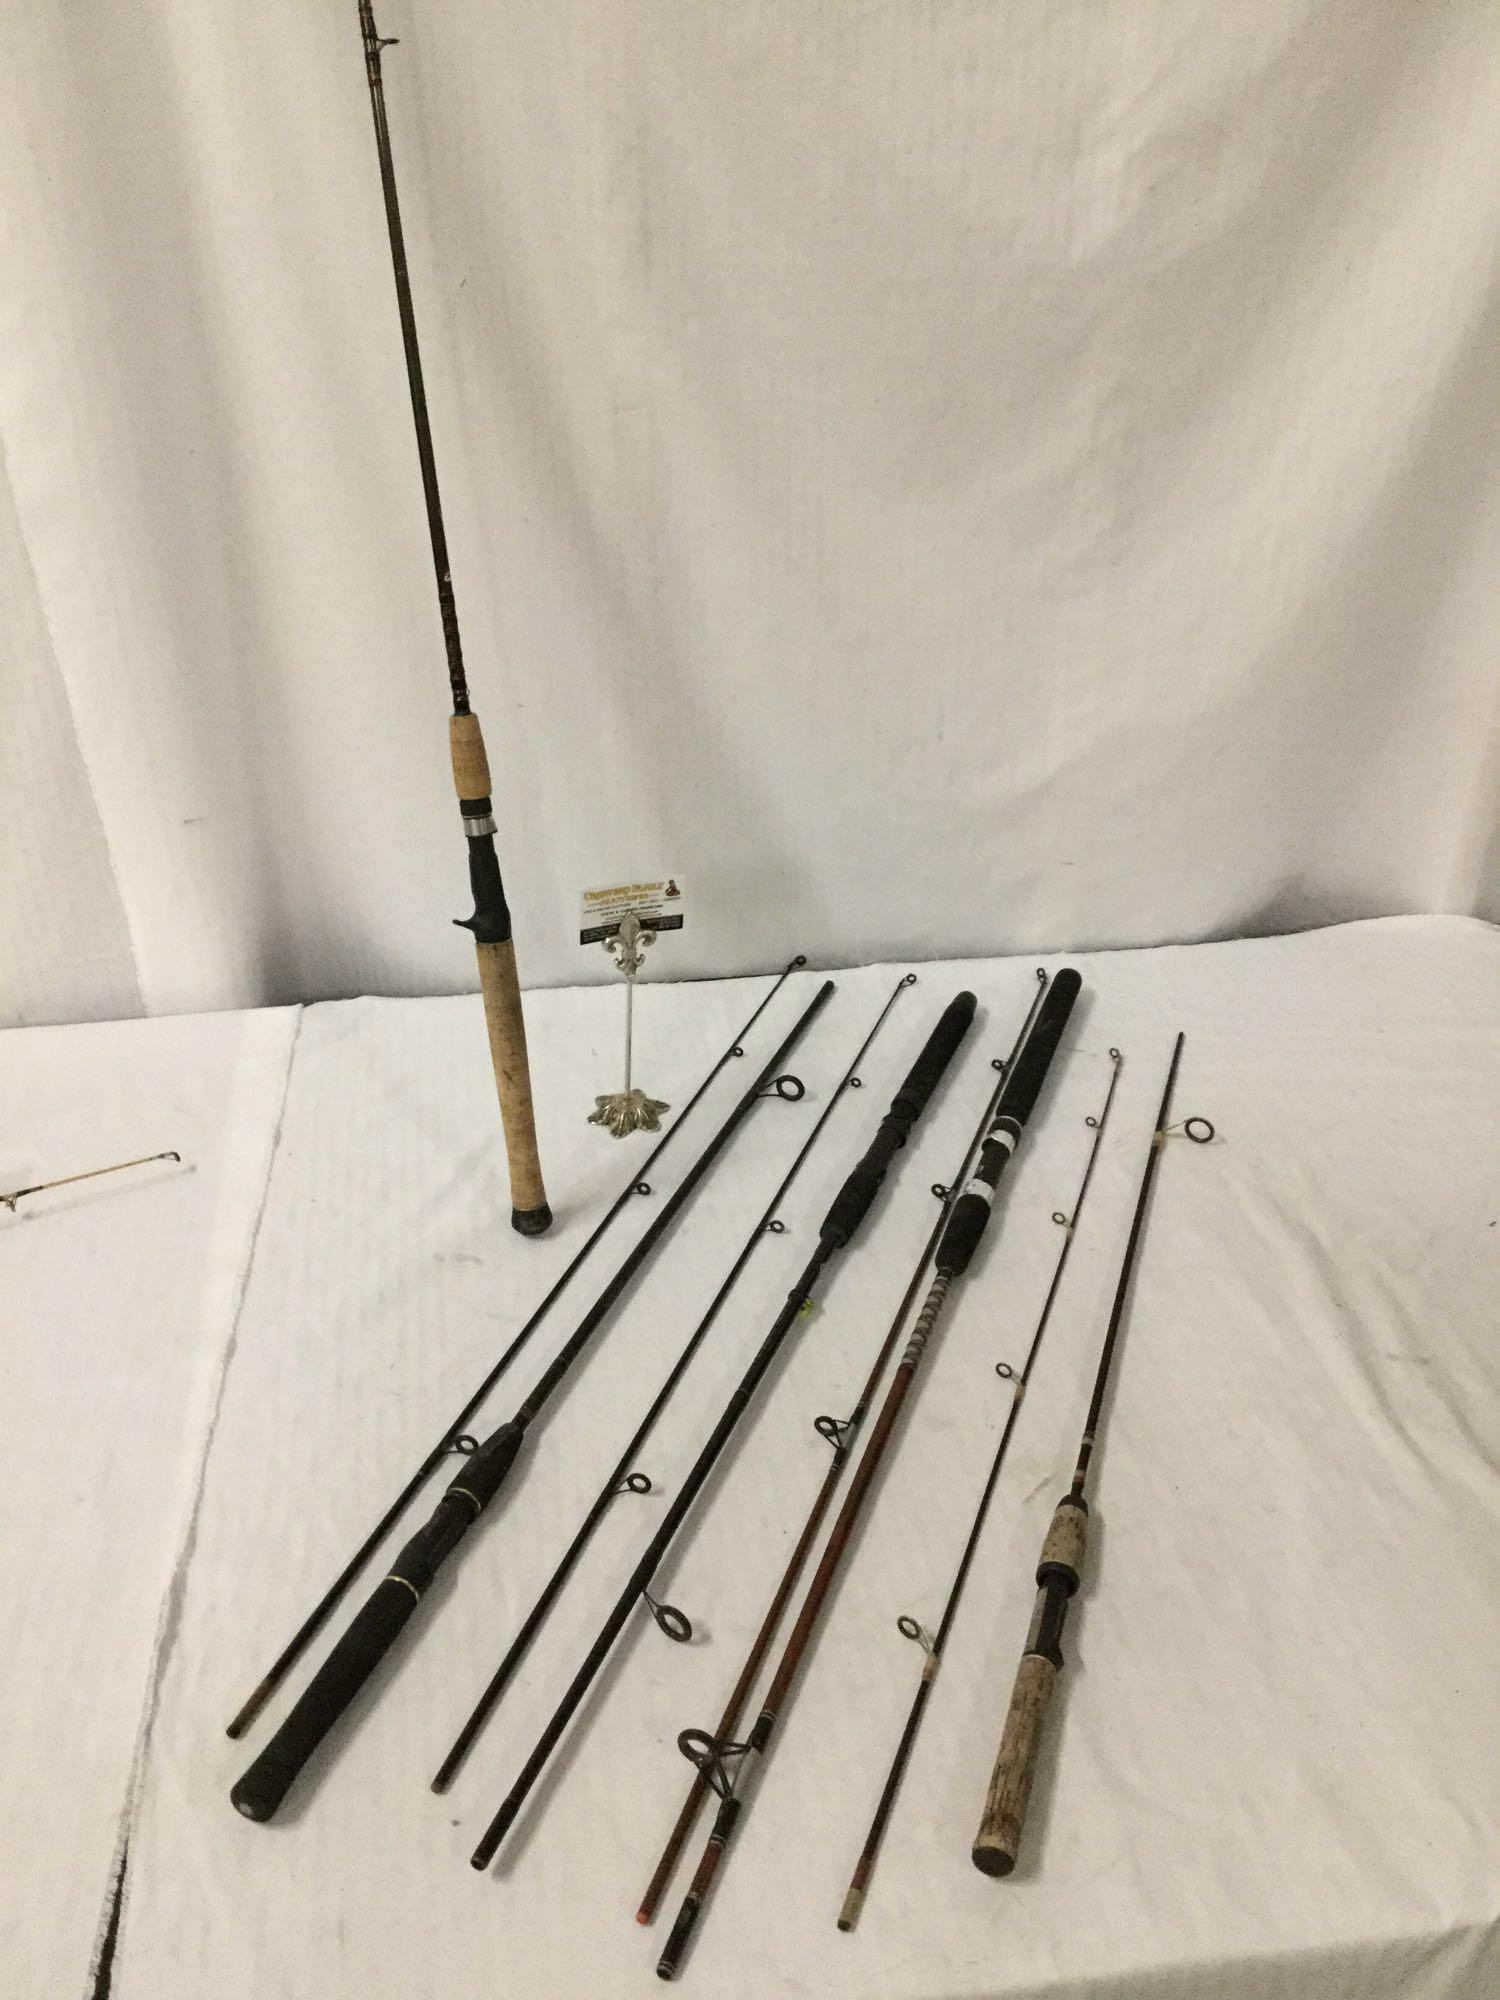 5 fishing poles; Wright and McGill - Eagle Claw, Shimano - Spinning 6 ft, Abu Garcia etc